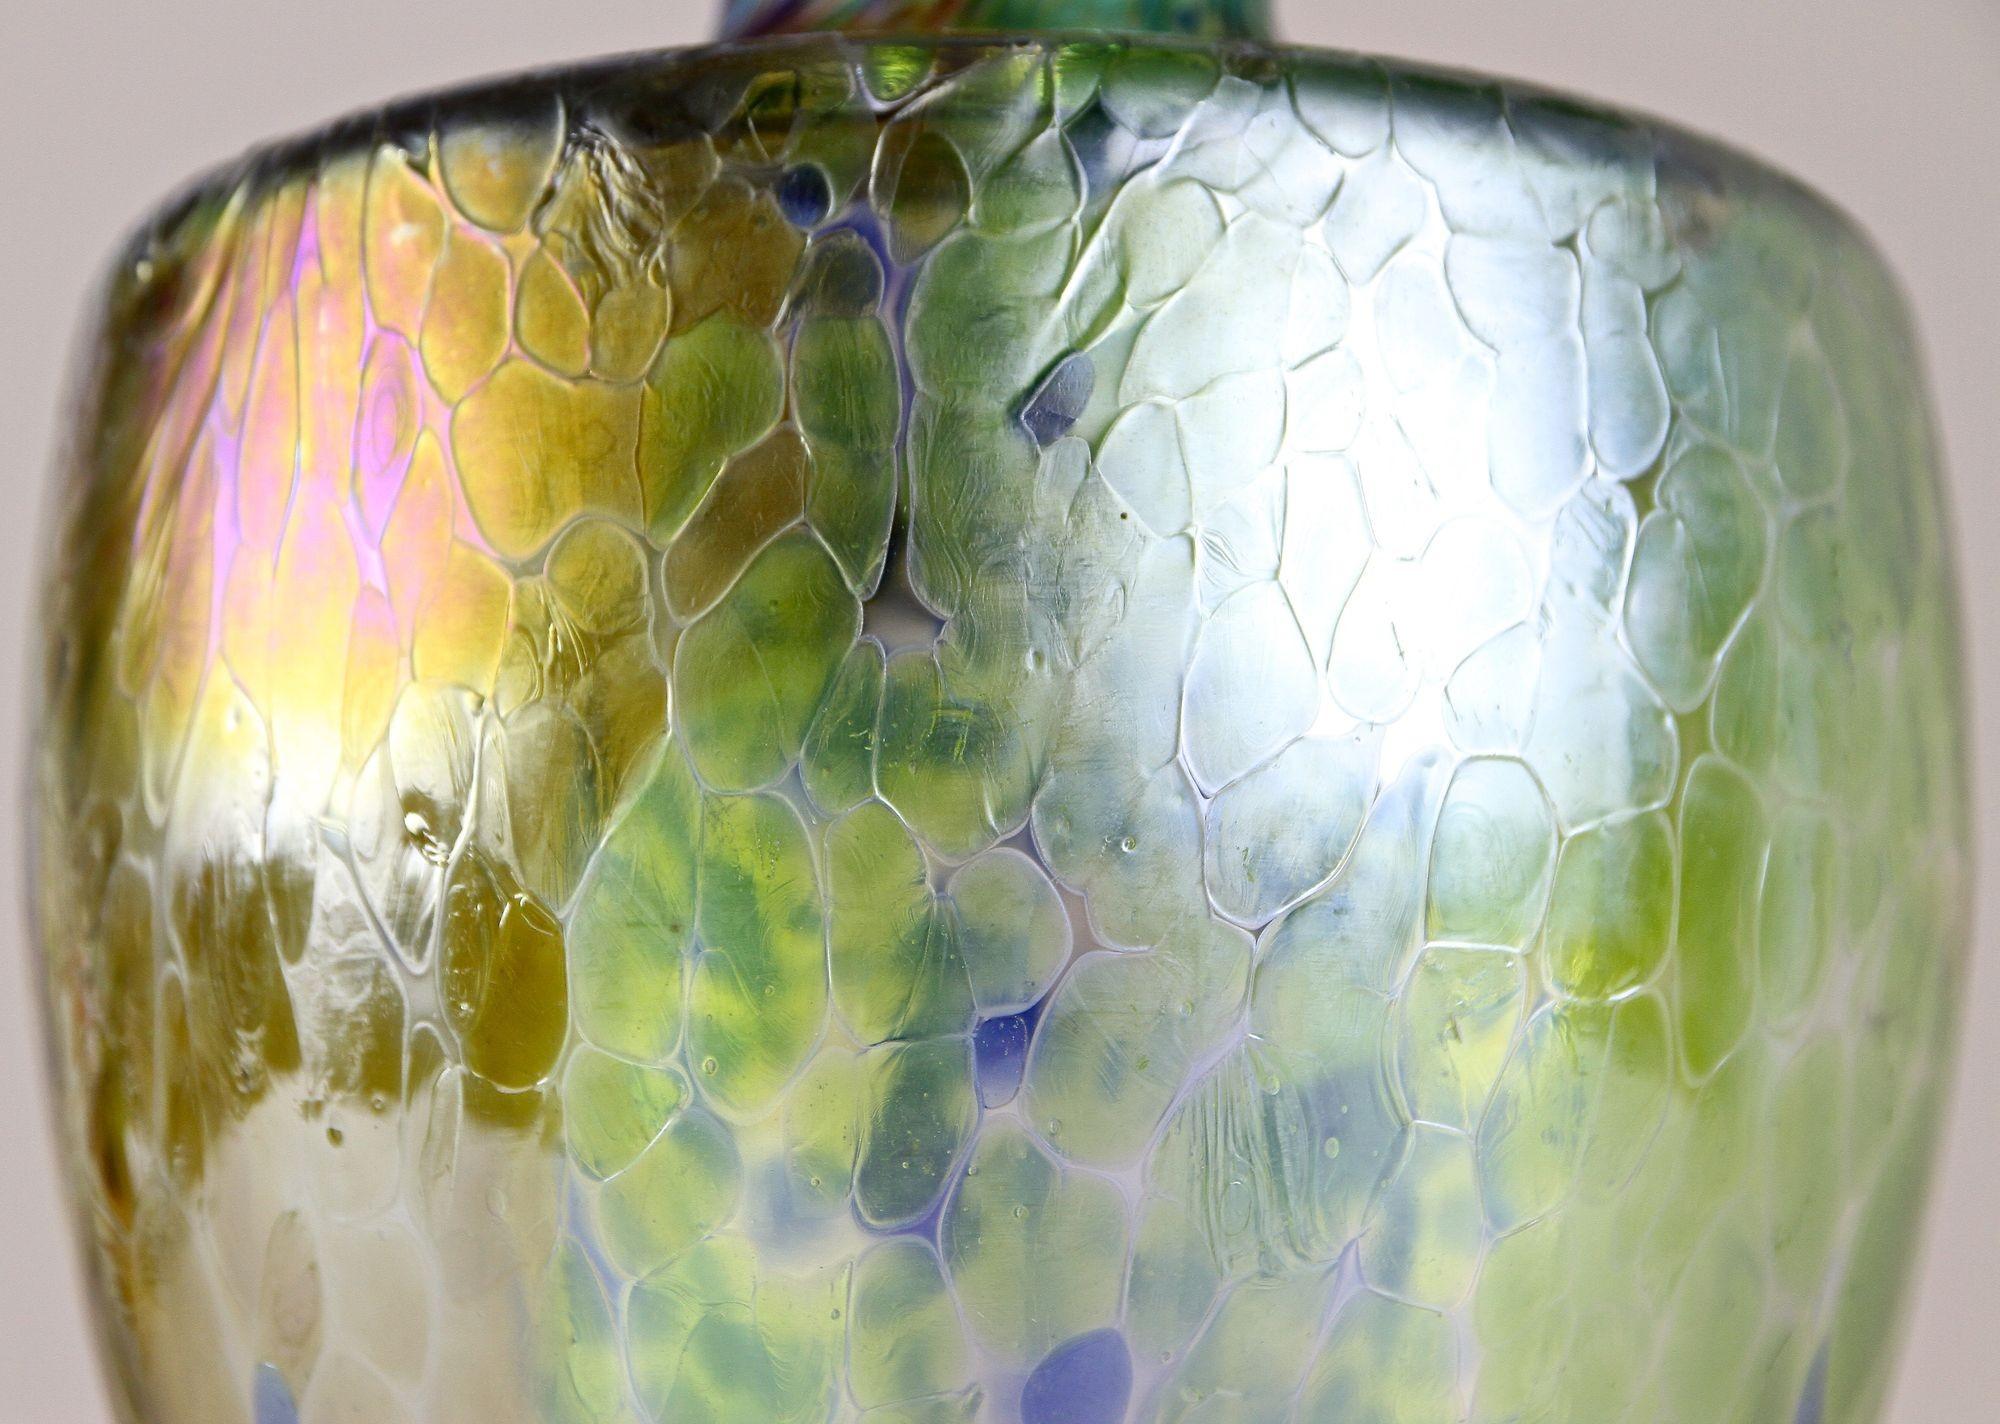 Iridescent Art Nouveau Glass Vase Attributed To Fritz Heckert, Bohemia ca. 1905 For Sale 8